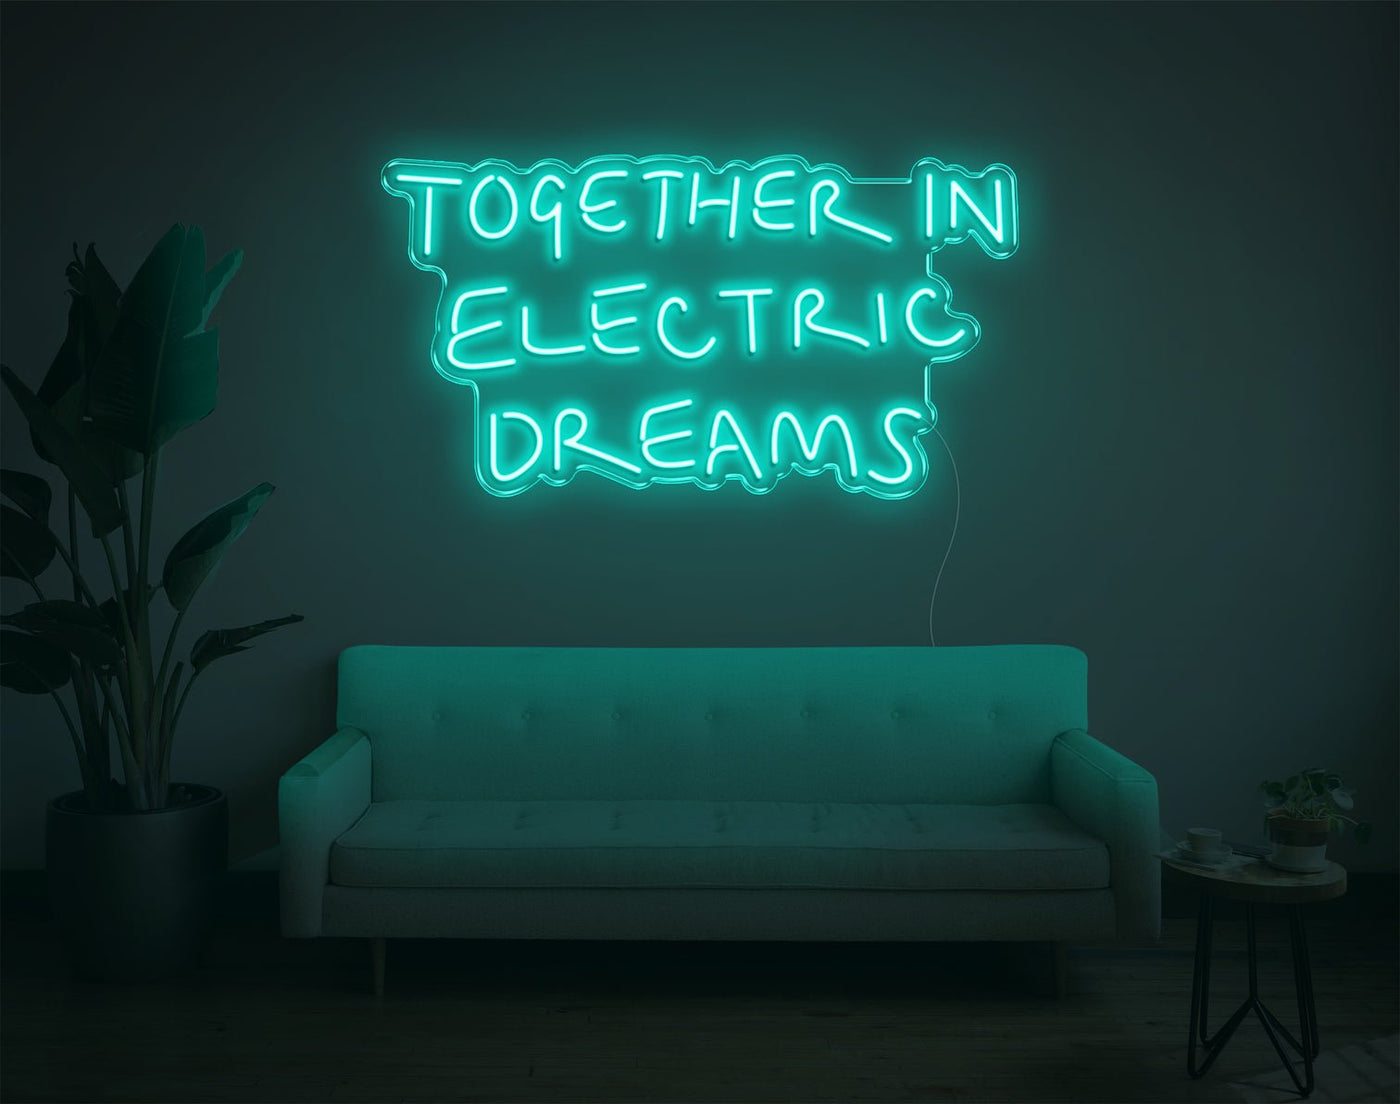 Together In Electric Dreams LED Neon Sign - 18inch x 33inchTurquoise